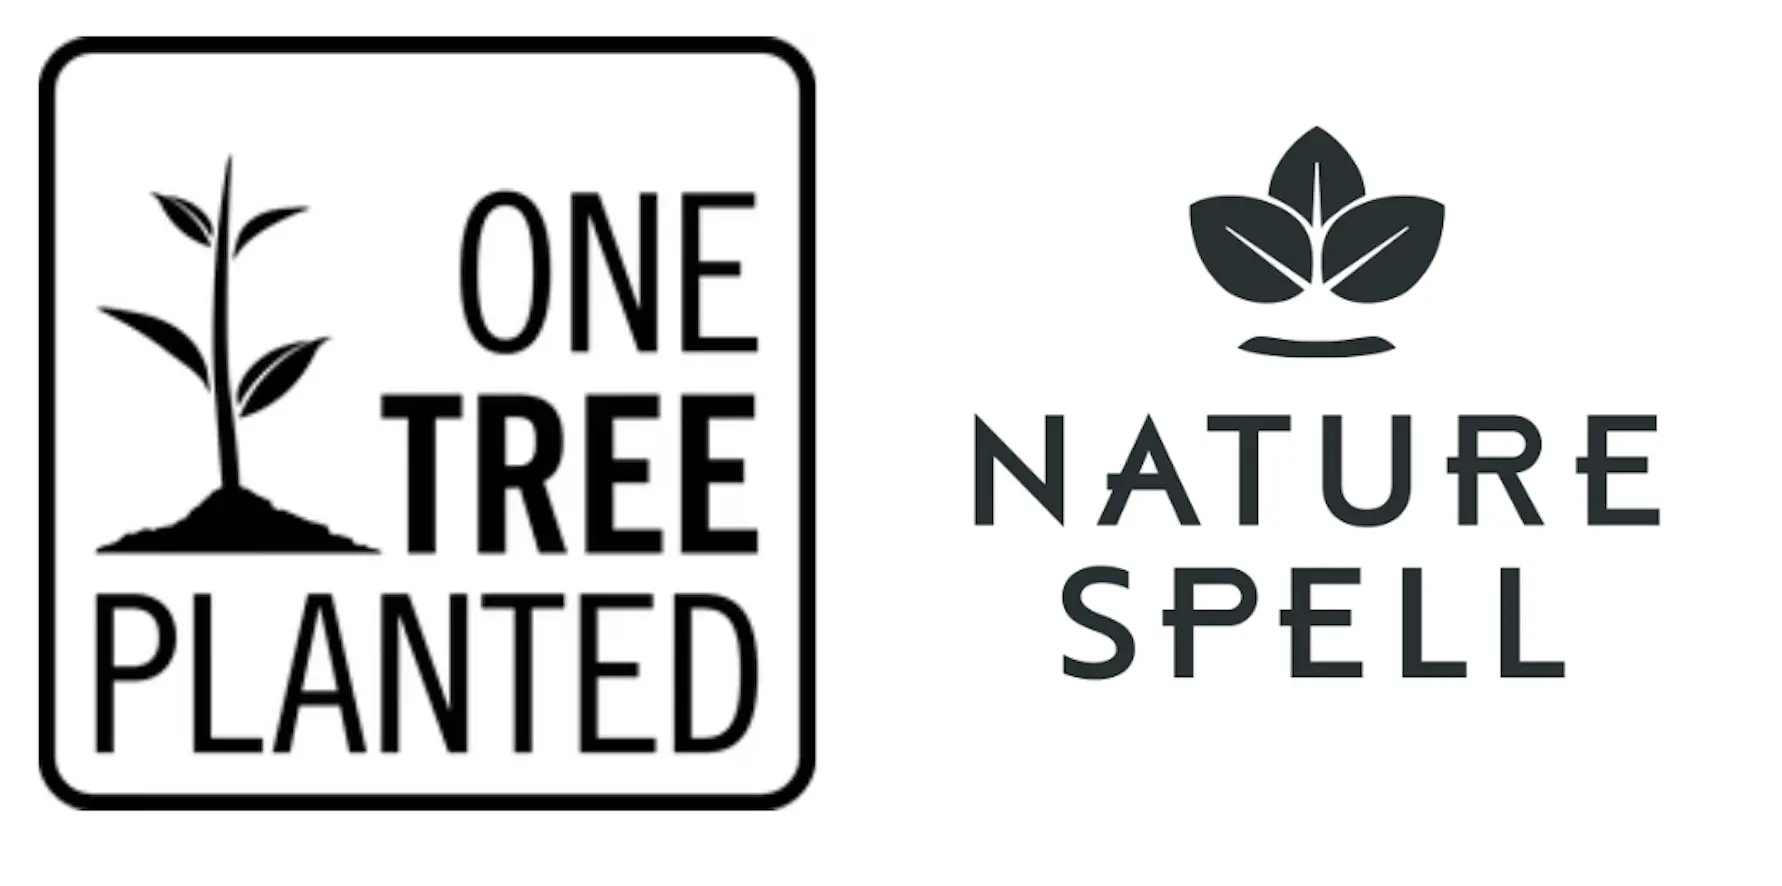 Nature Spell Partners with ‘One Tree Planted’ to Promote Purposeful Shopping Ahead of Earth Day